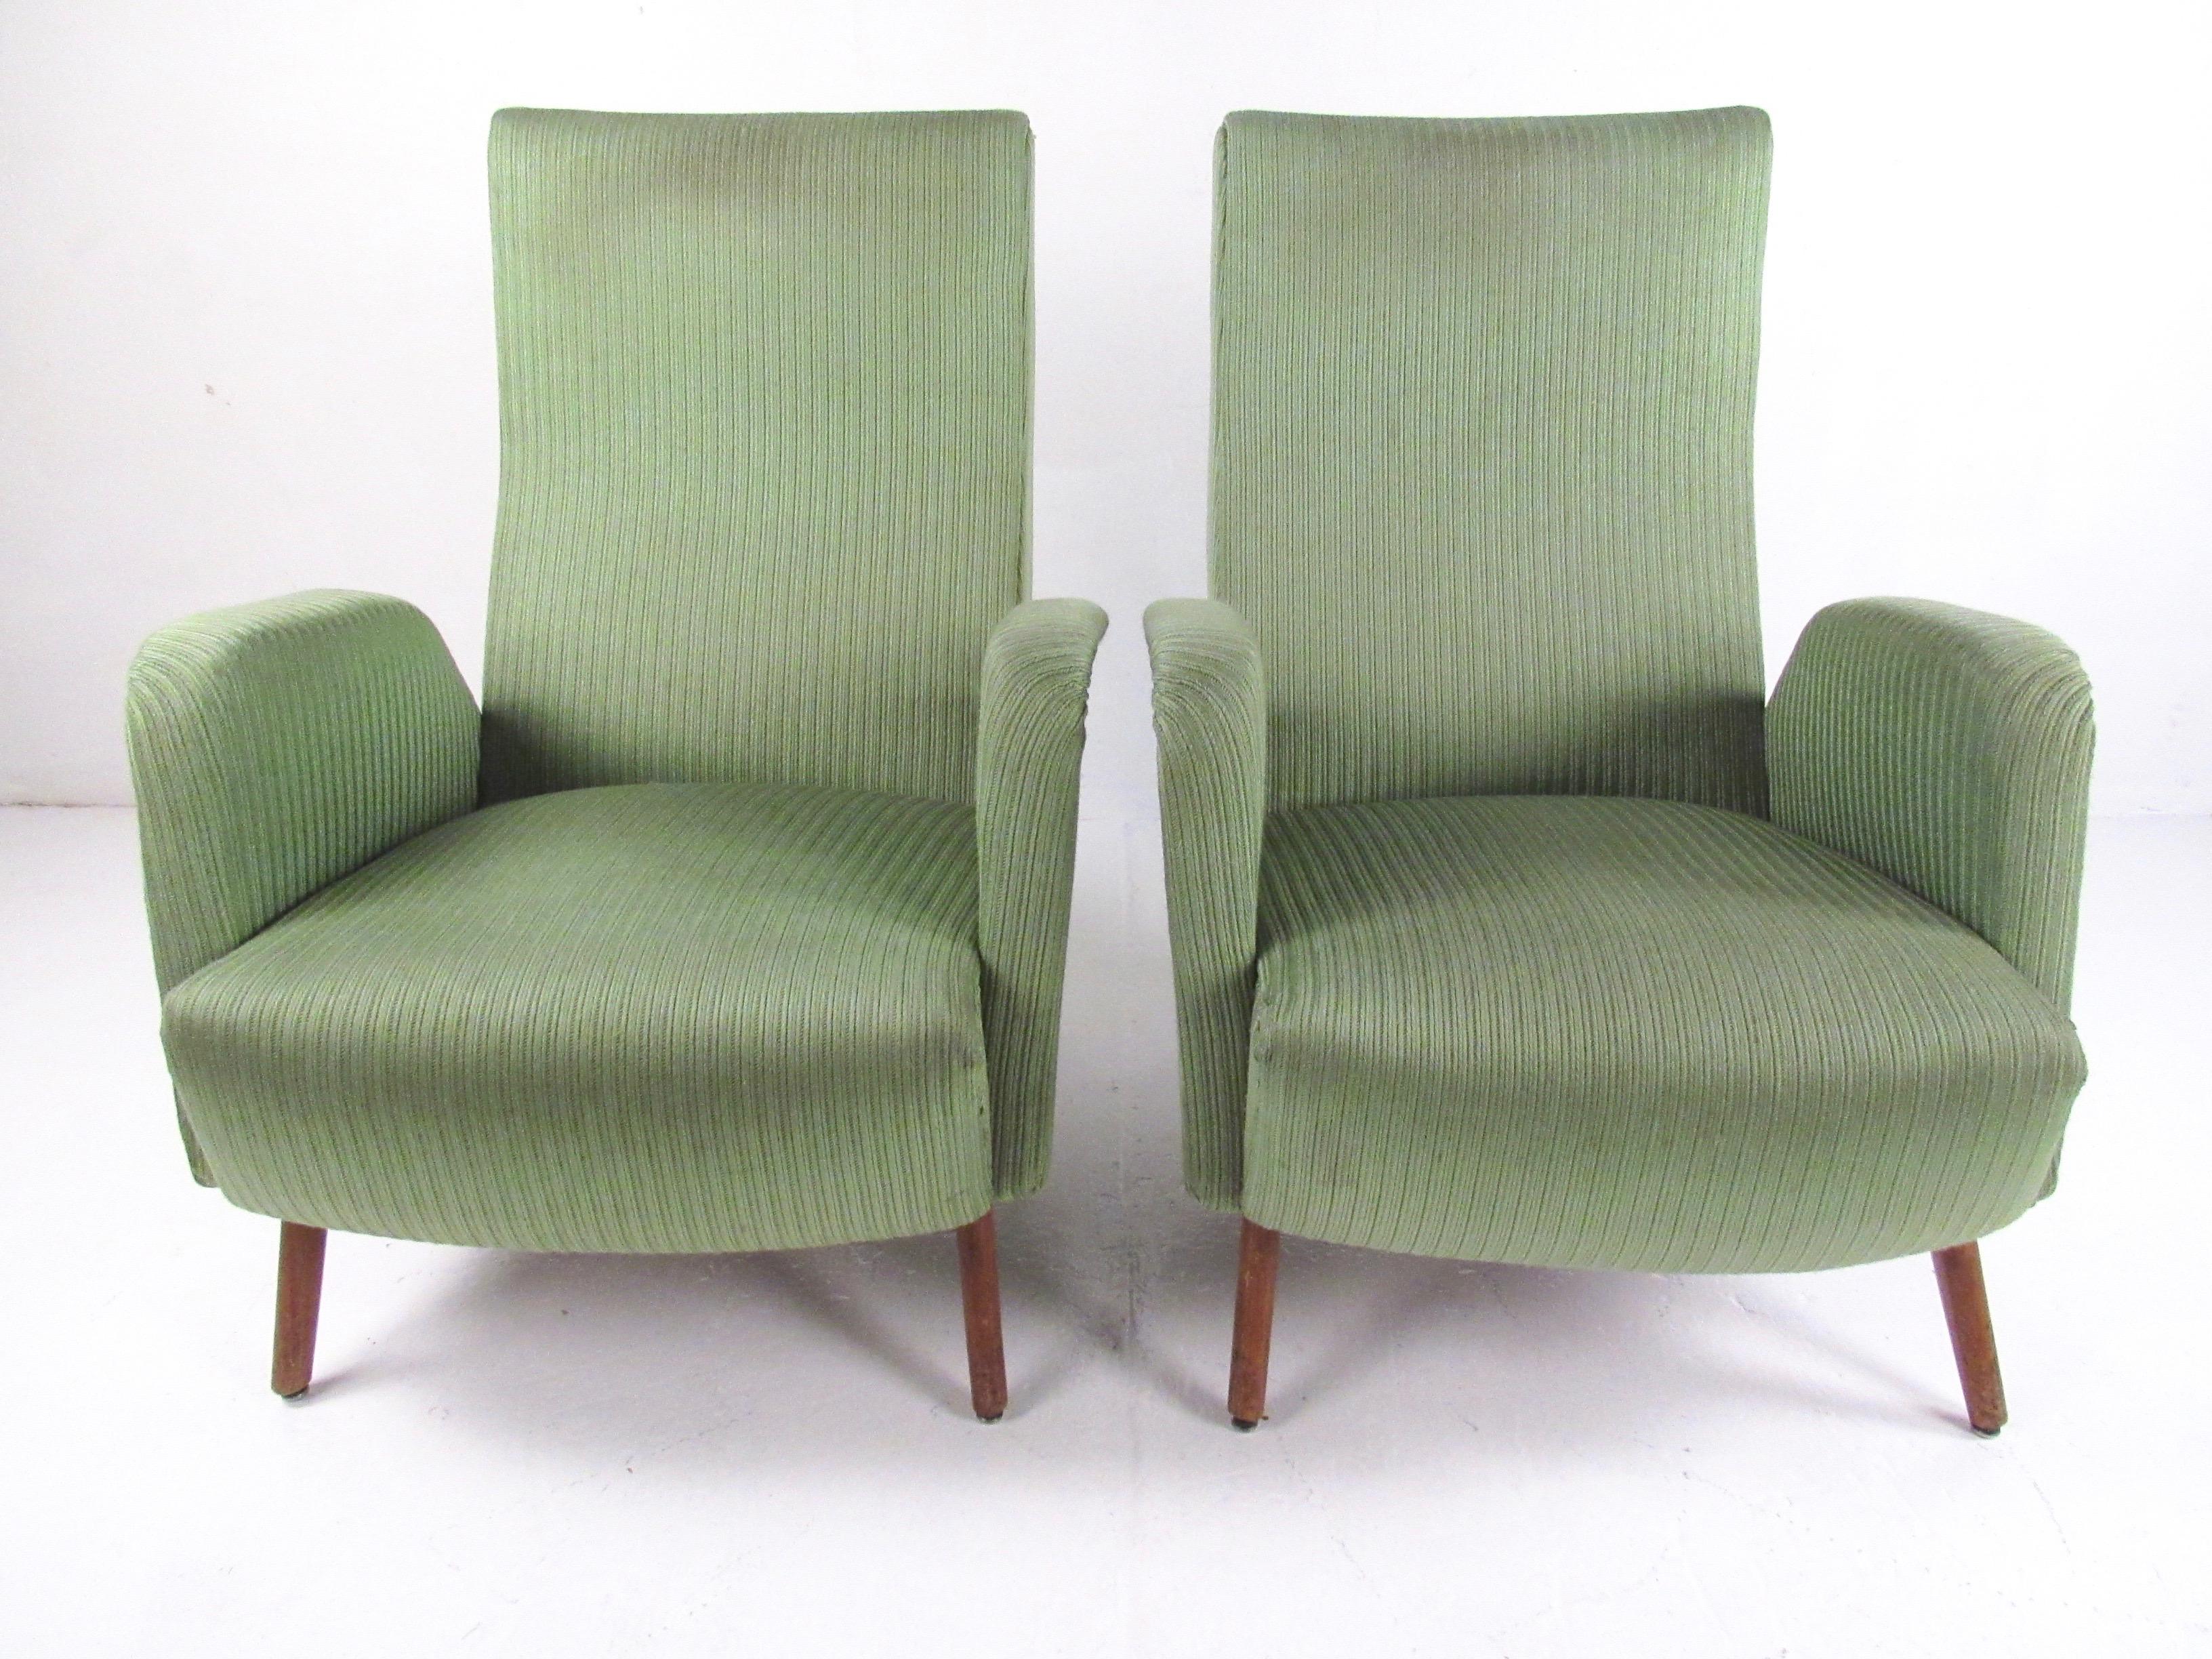 This striking pair of Mid-Century Modern Italian lounge chairs feature vintage fabric, sculpted high back seats, and upholstered arm rests. Vintage brass upholstery studs showcase the 1950s Italian modern sensibility while the hardwood construction